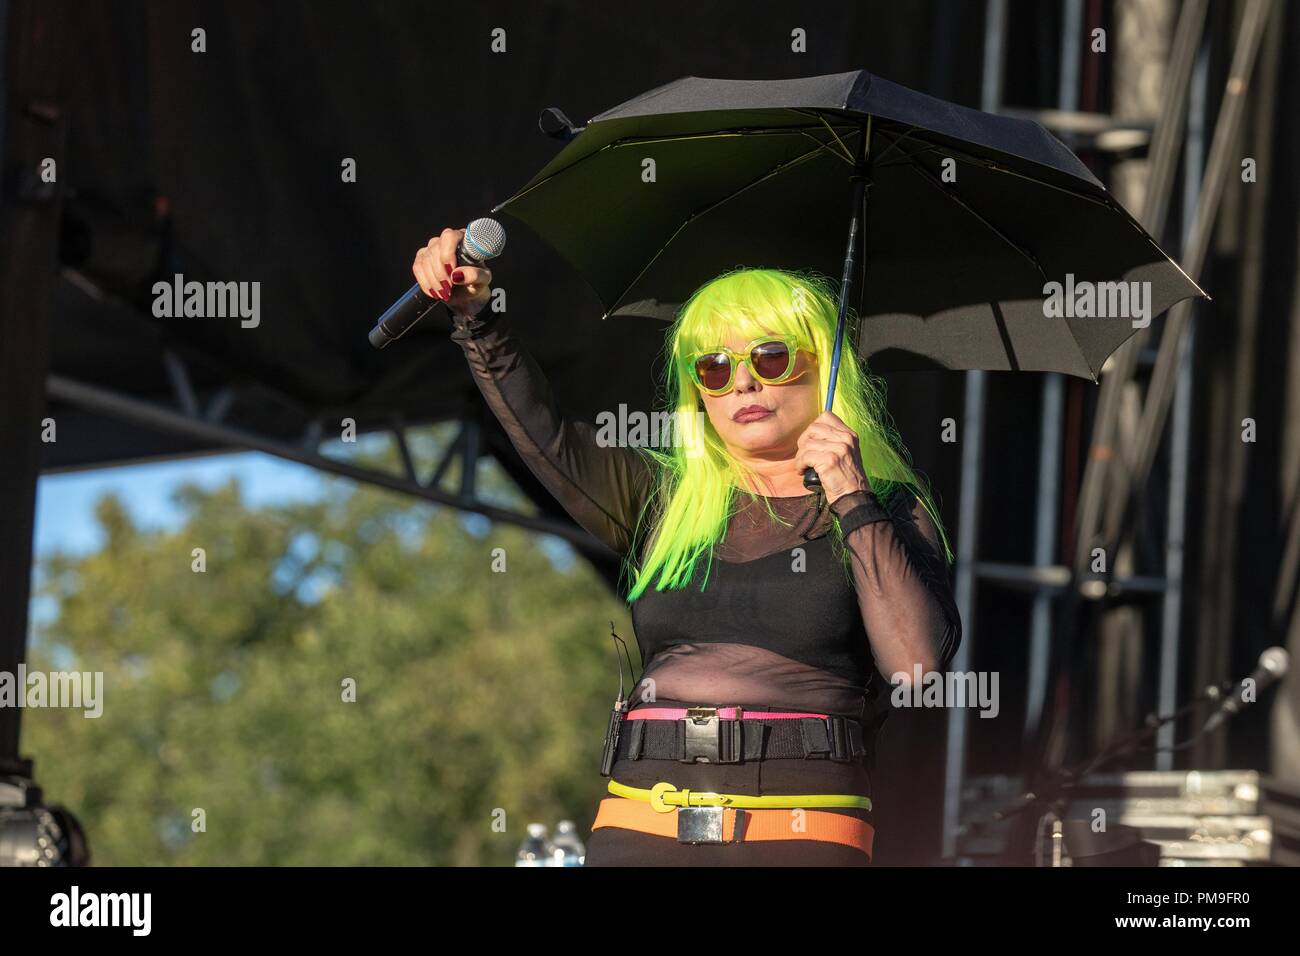 Chicago, Illinois, USA. 16th Sep, 2018. BLONDIE (DEBBIE HARRY) during Riot Fest at Douglas Park in Chicago, Illinois Credit: Daniel DeSlover/ZUMA Wire/Alamy Live News Stock Photo